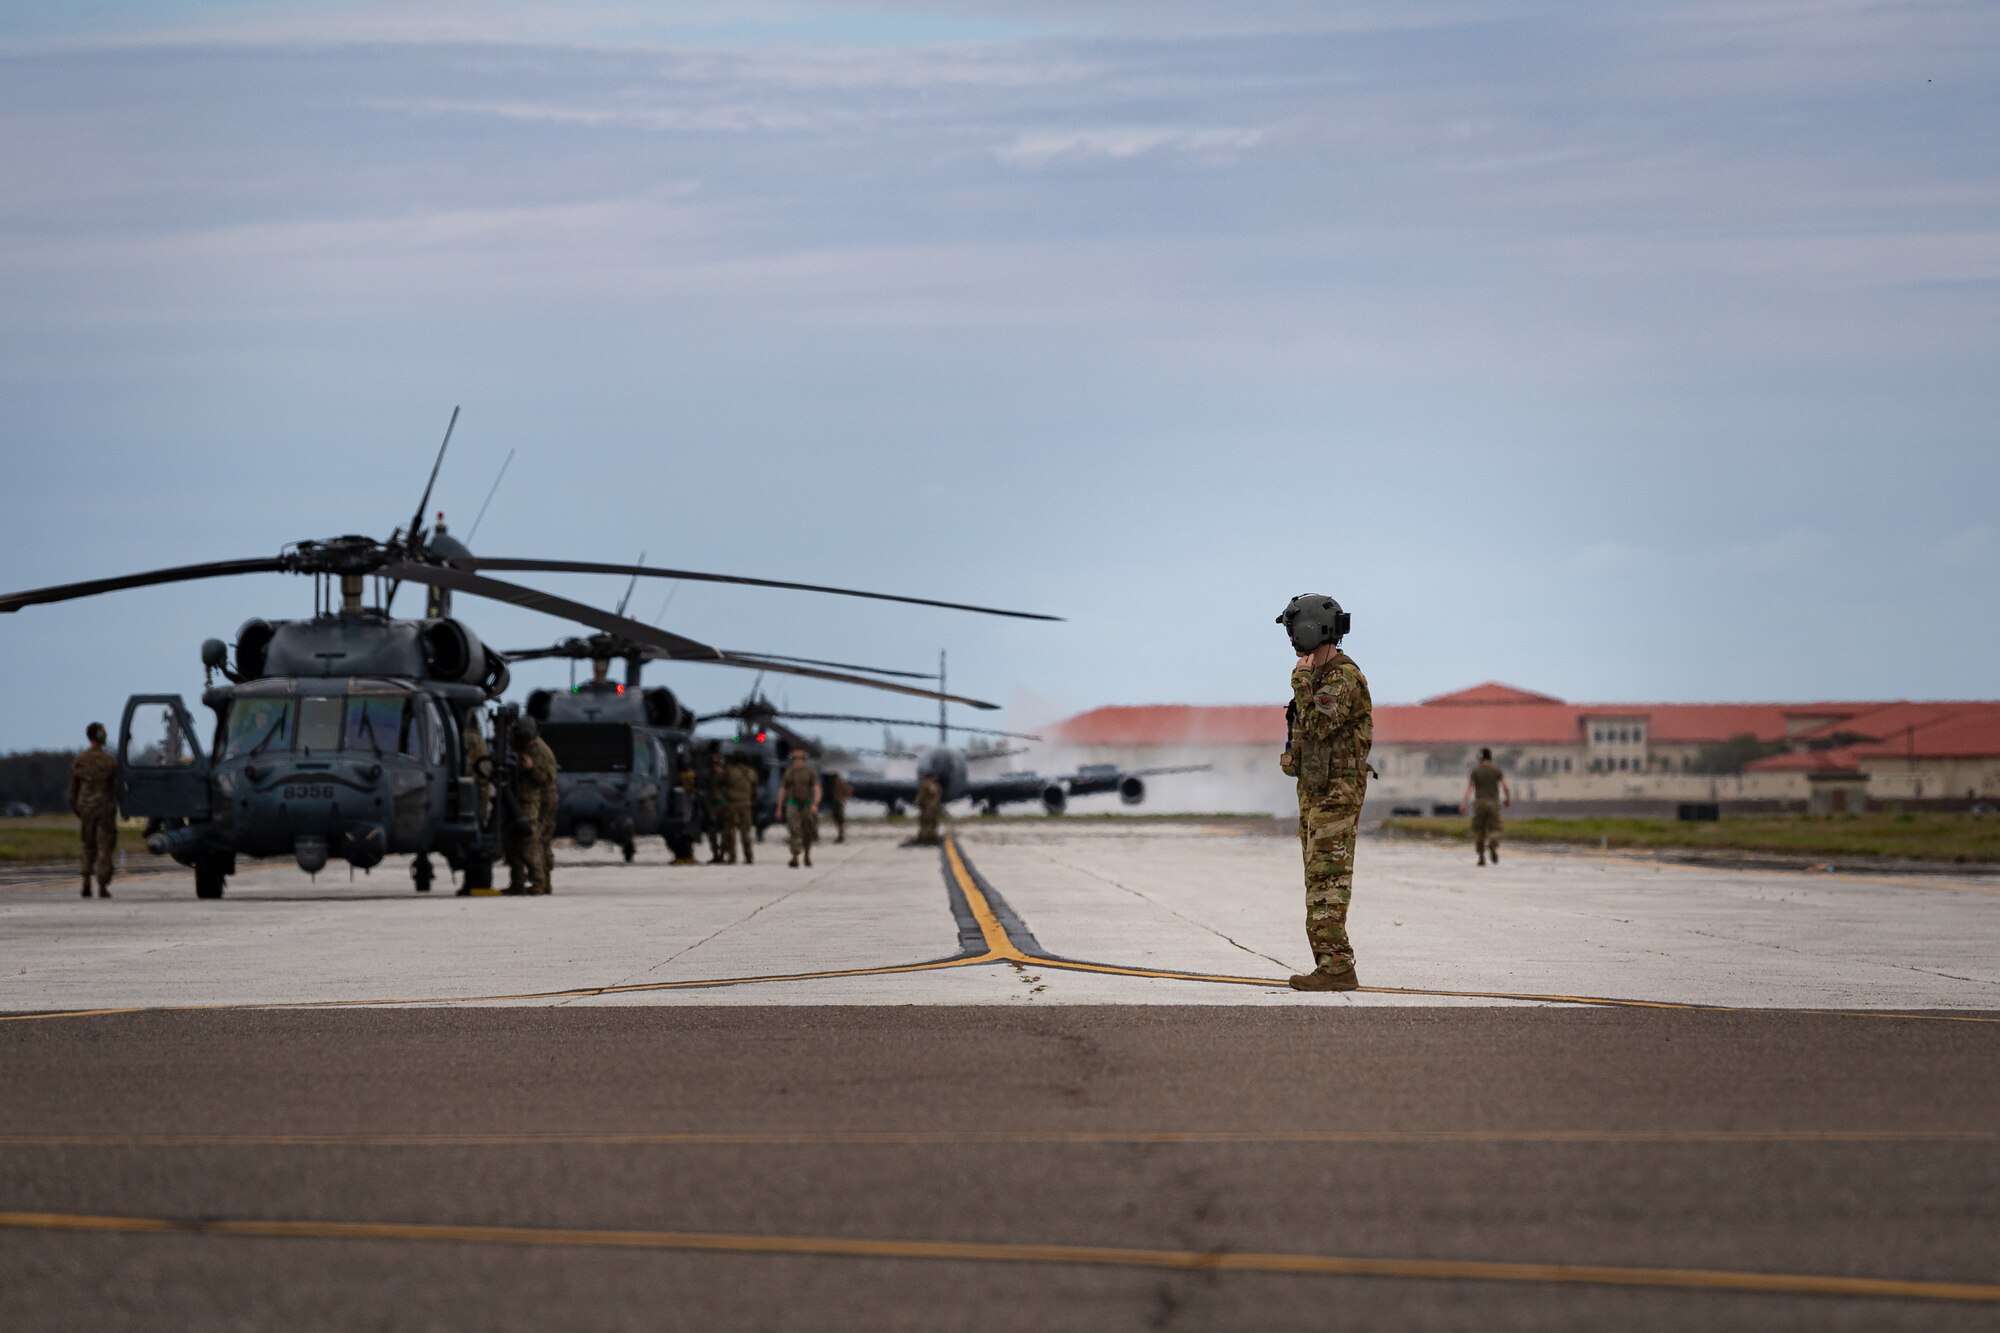 A photo of Airmen departing aircraft onto the flightline